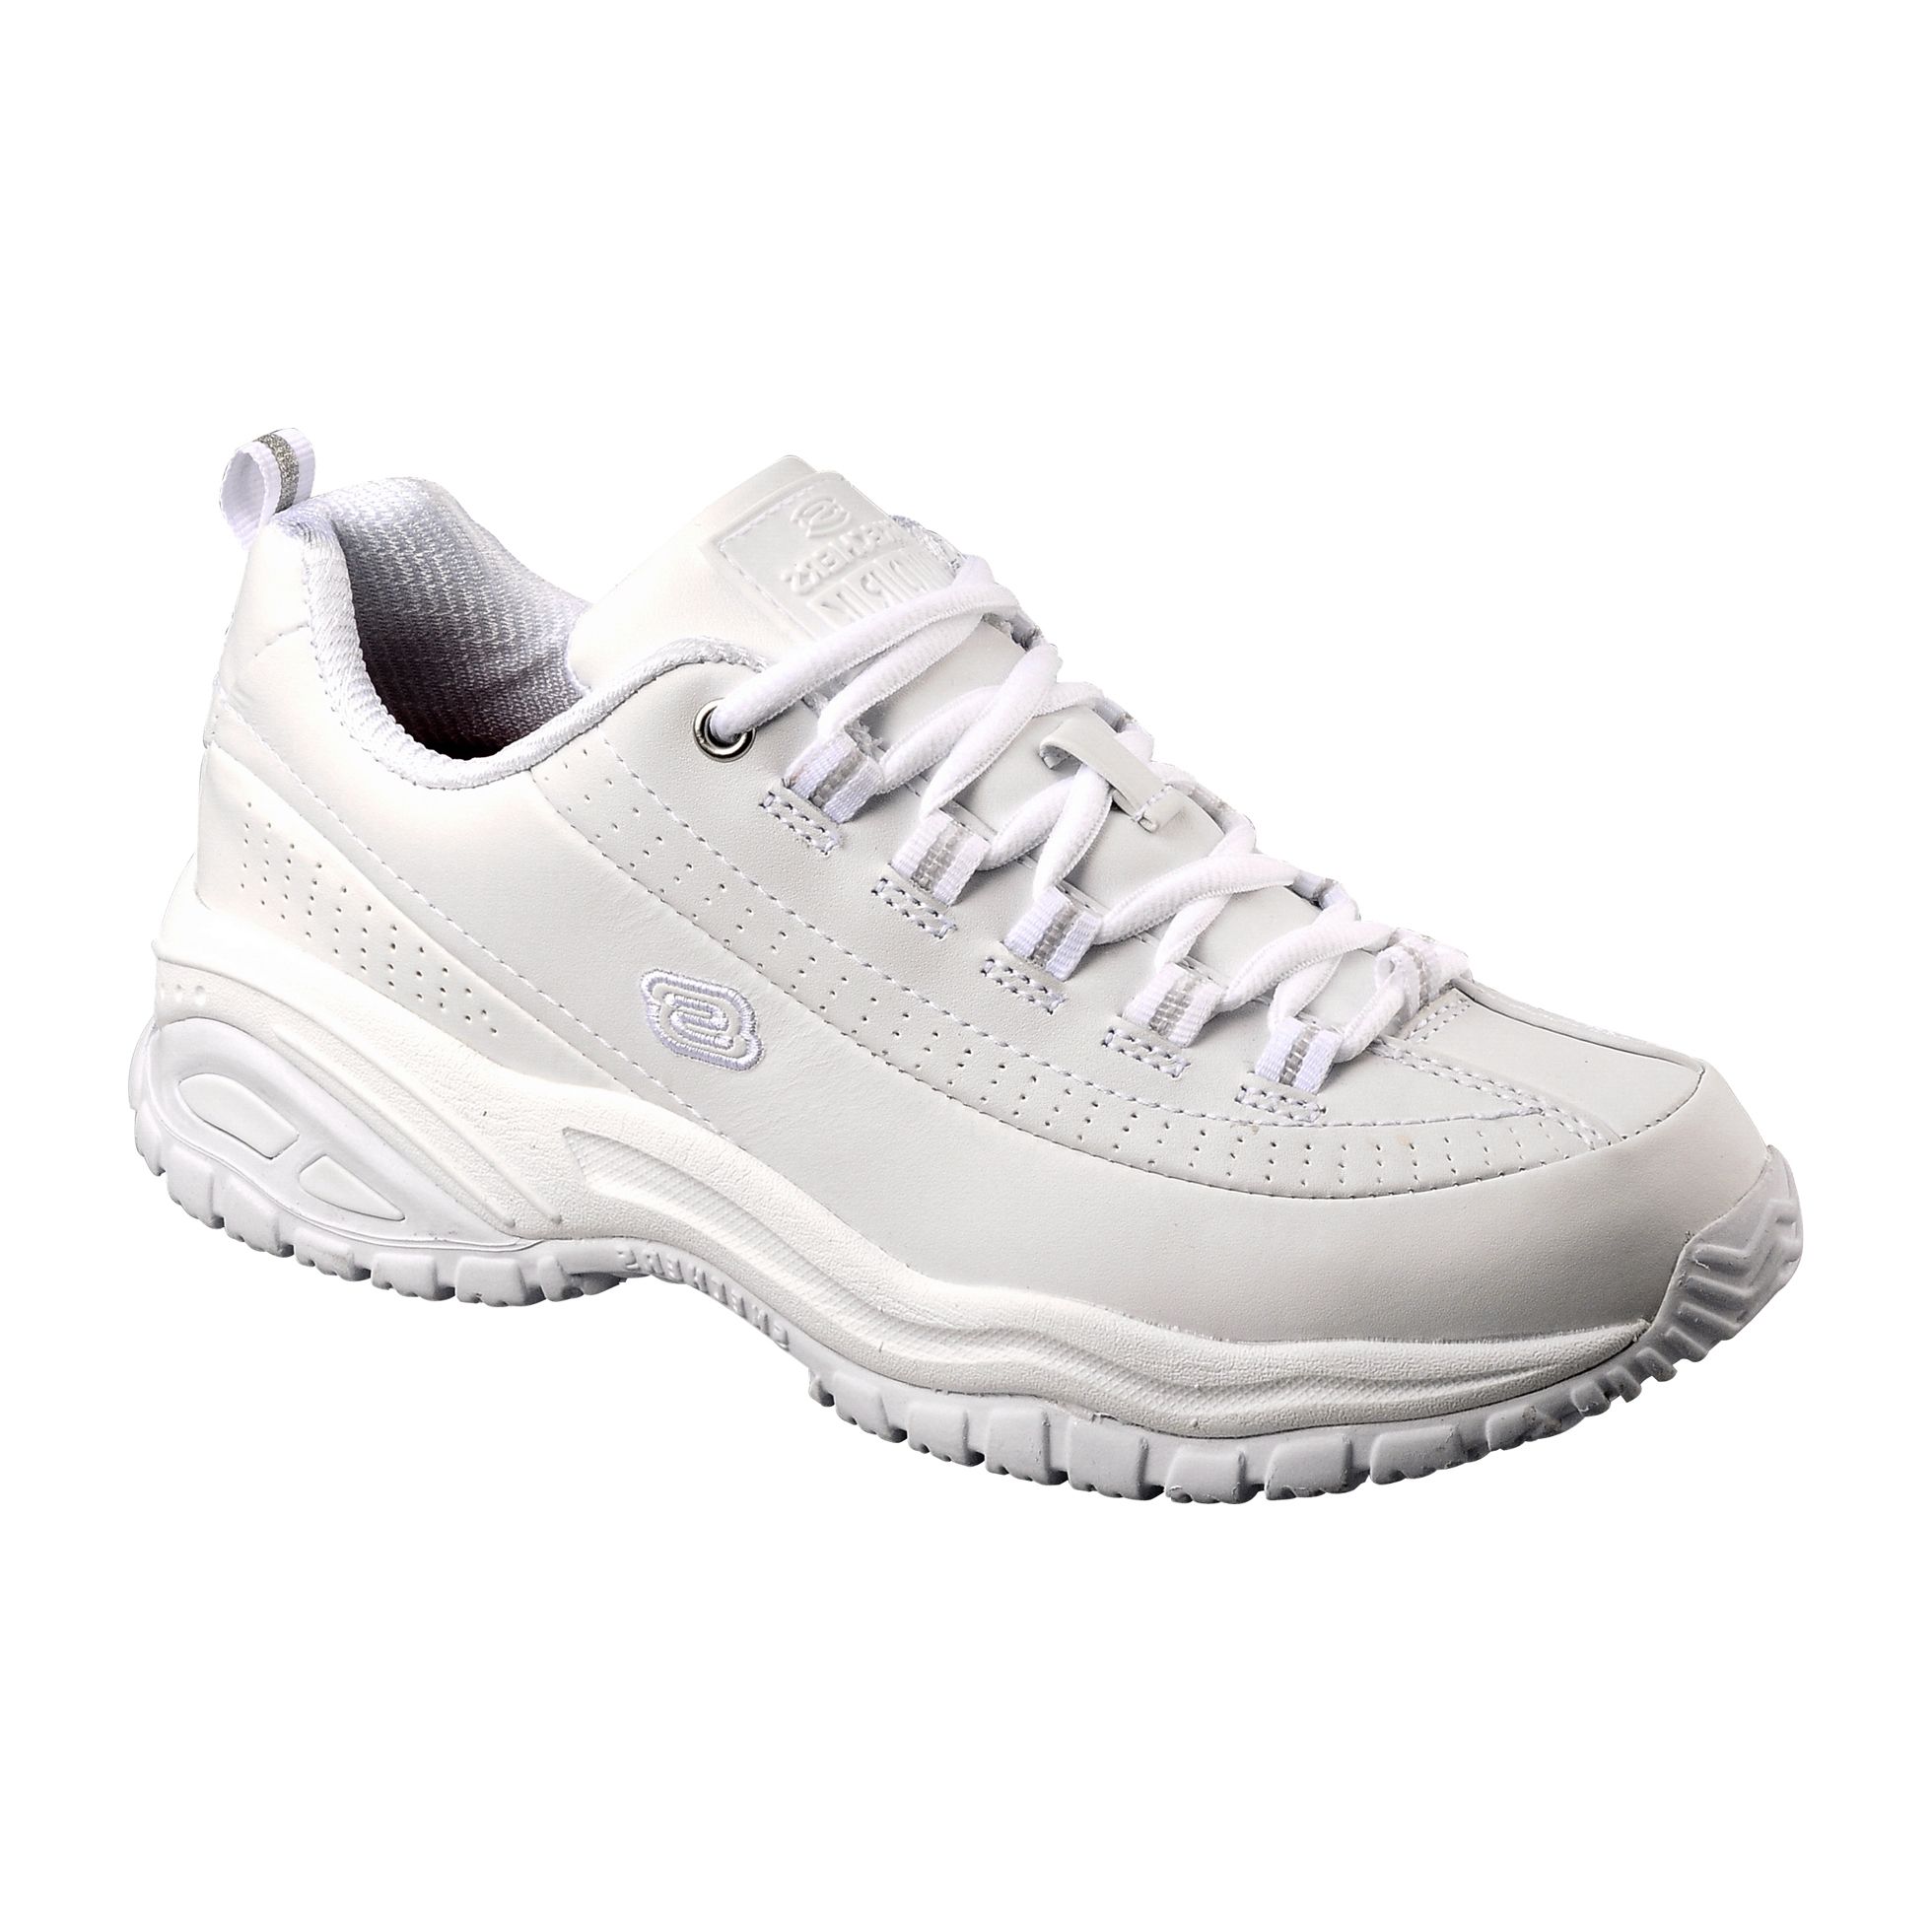 Skechers Women's Work Shoes Soft Stride Leather Oxford White 76033 W ...